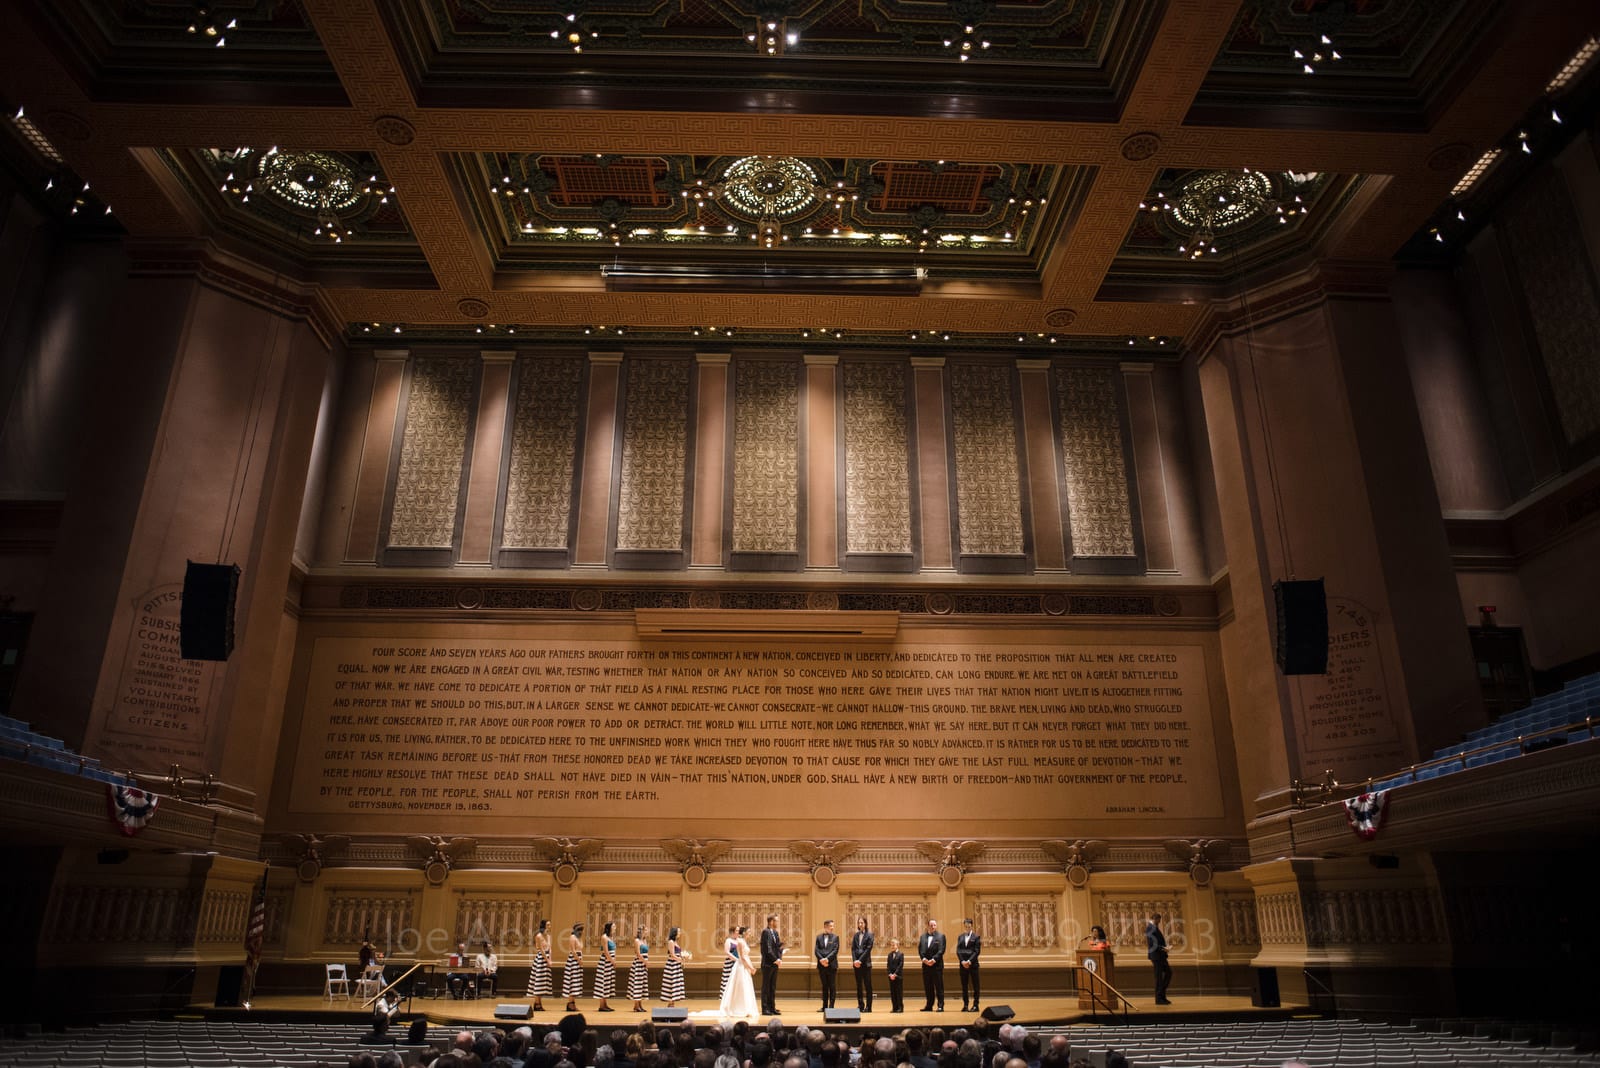 An overall interior view of the auditorium at Soldiers and Sailors Wedding Photos.